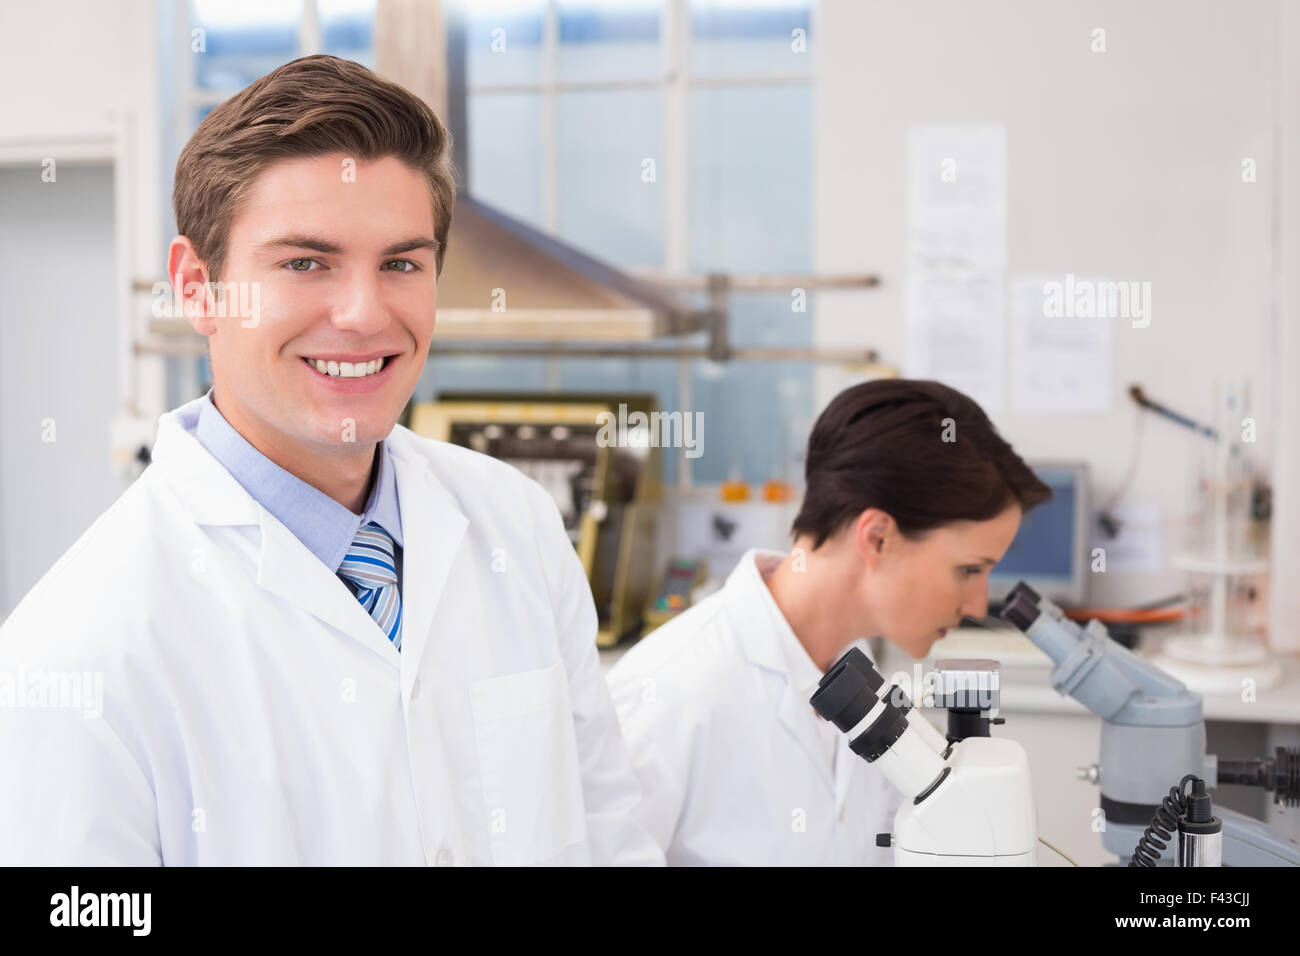 Scientists working with microscopes Stock Photo